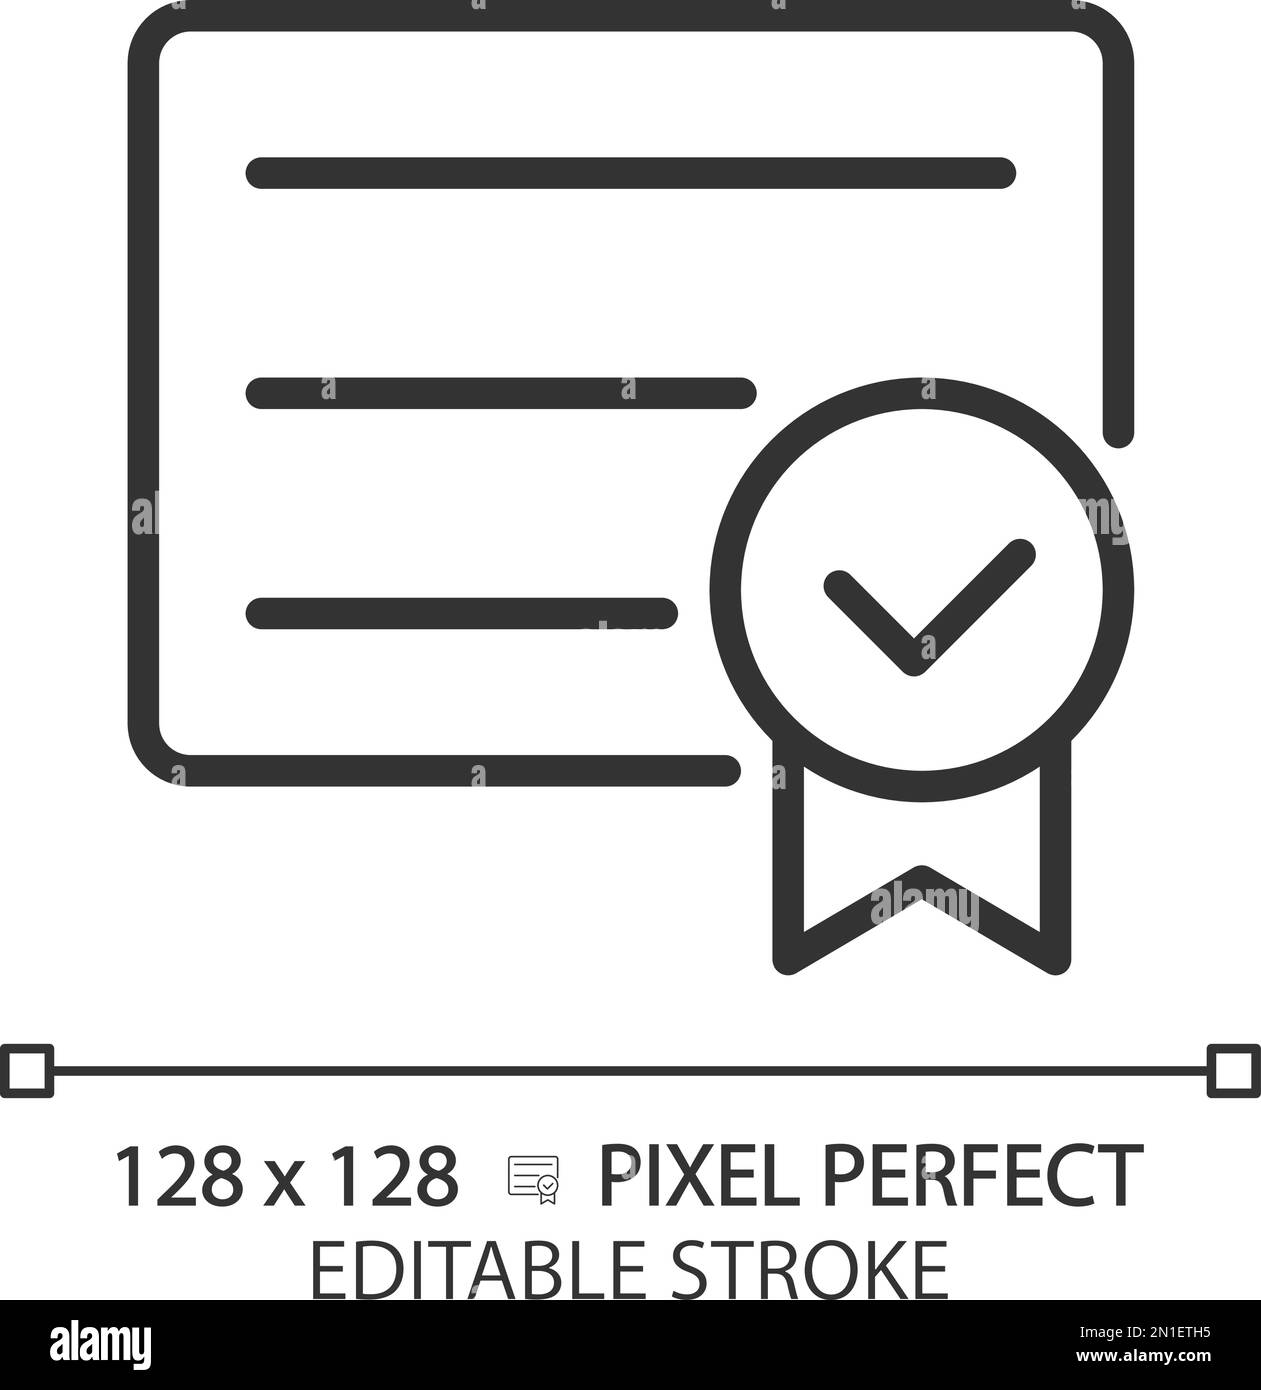 Diploma with check mark pixel perfect linear icon Stock Vector